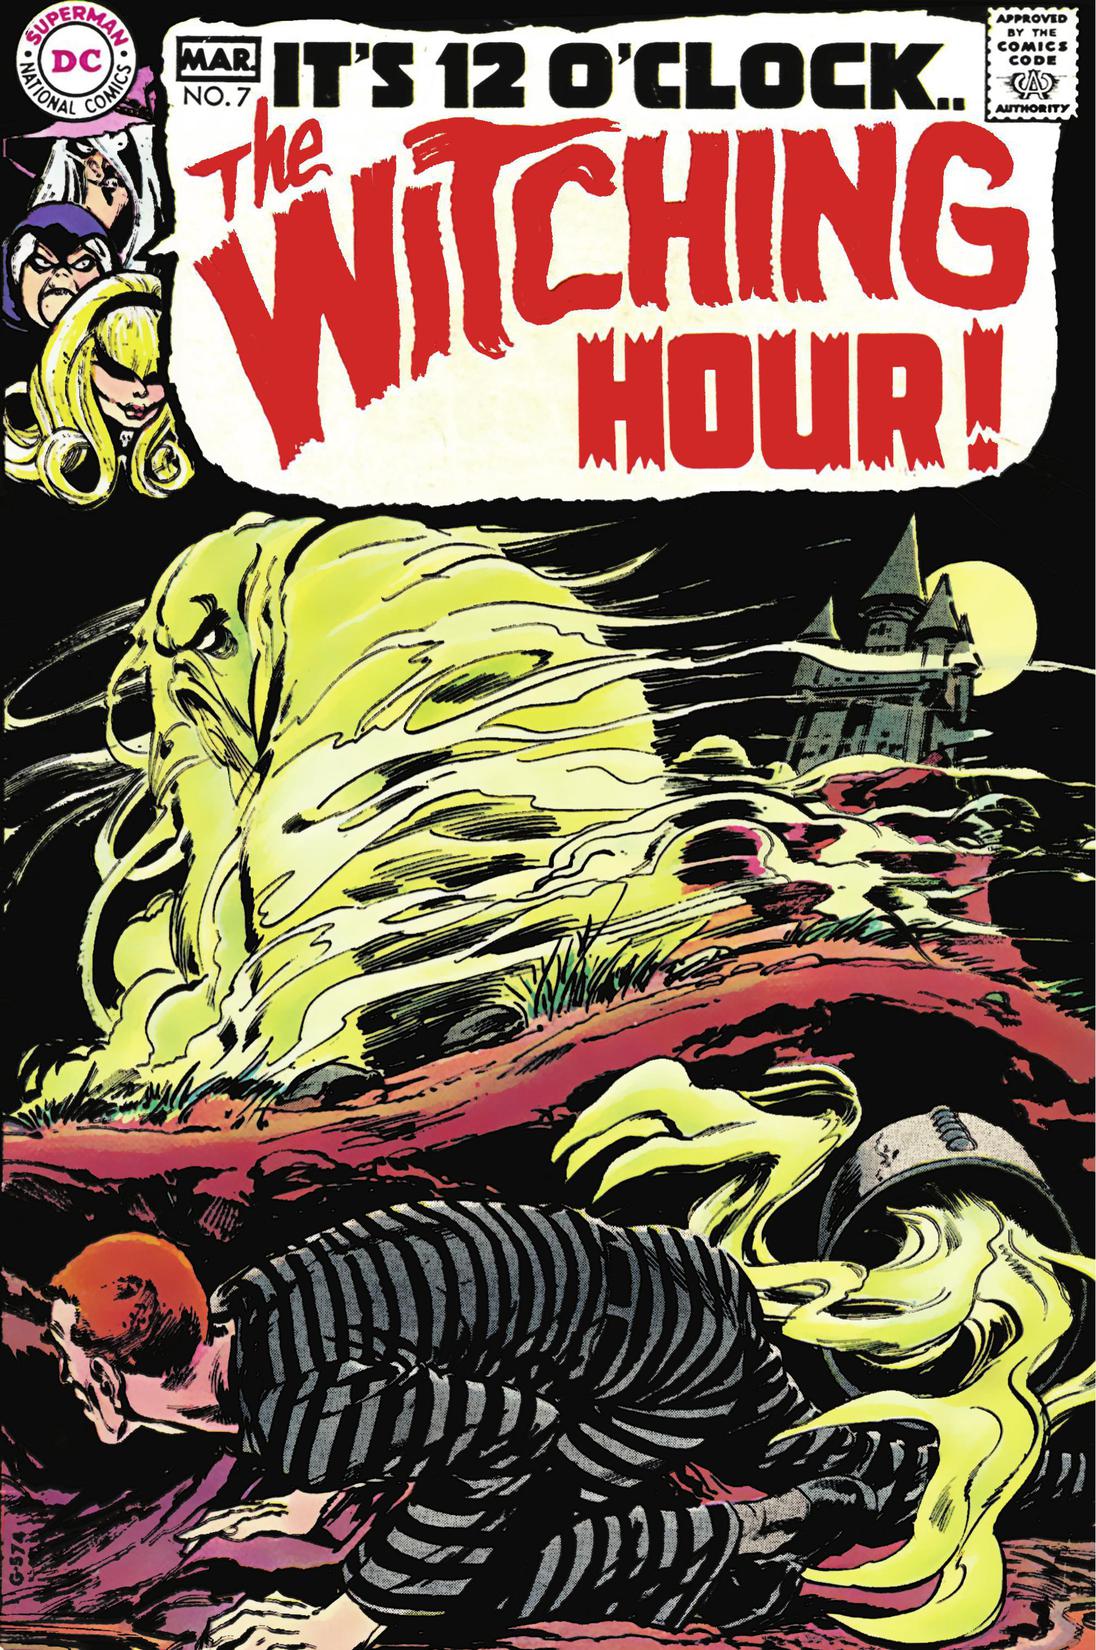 The Witching Hour #7 preview images